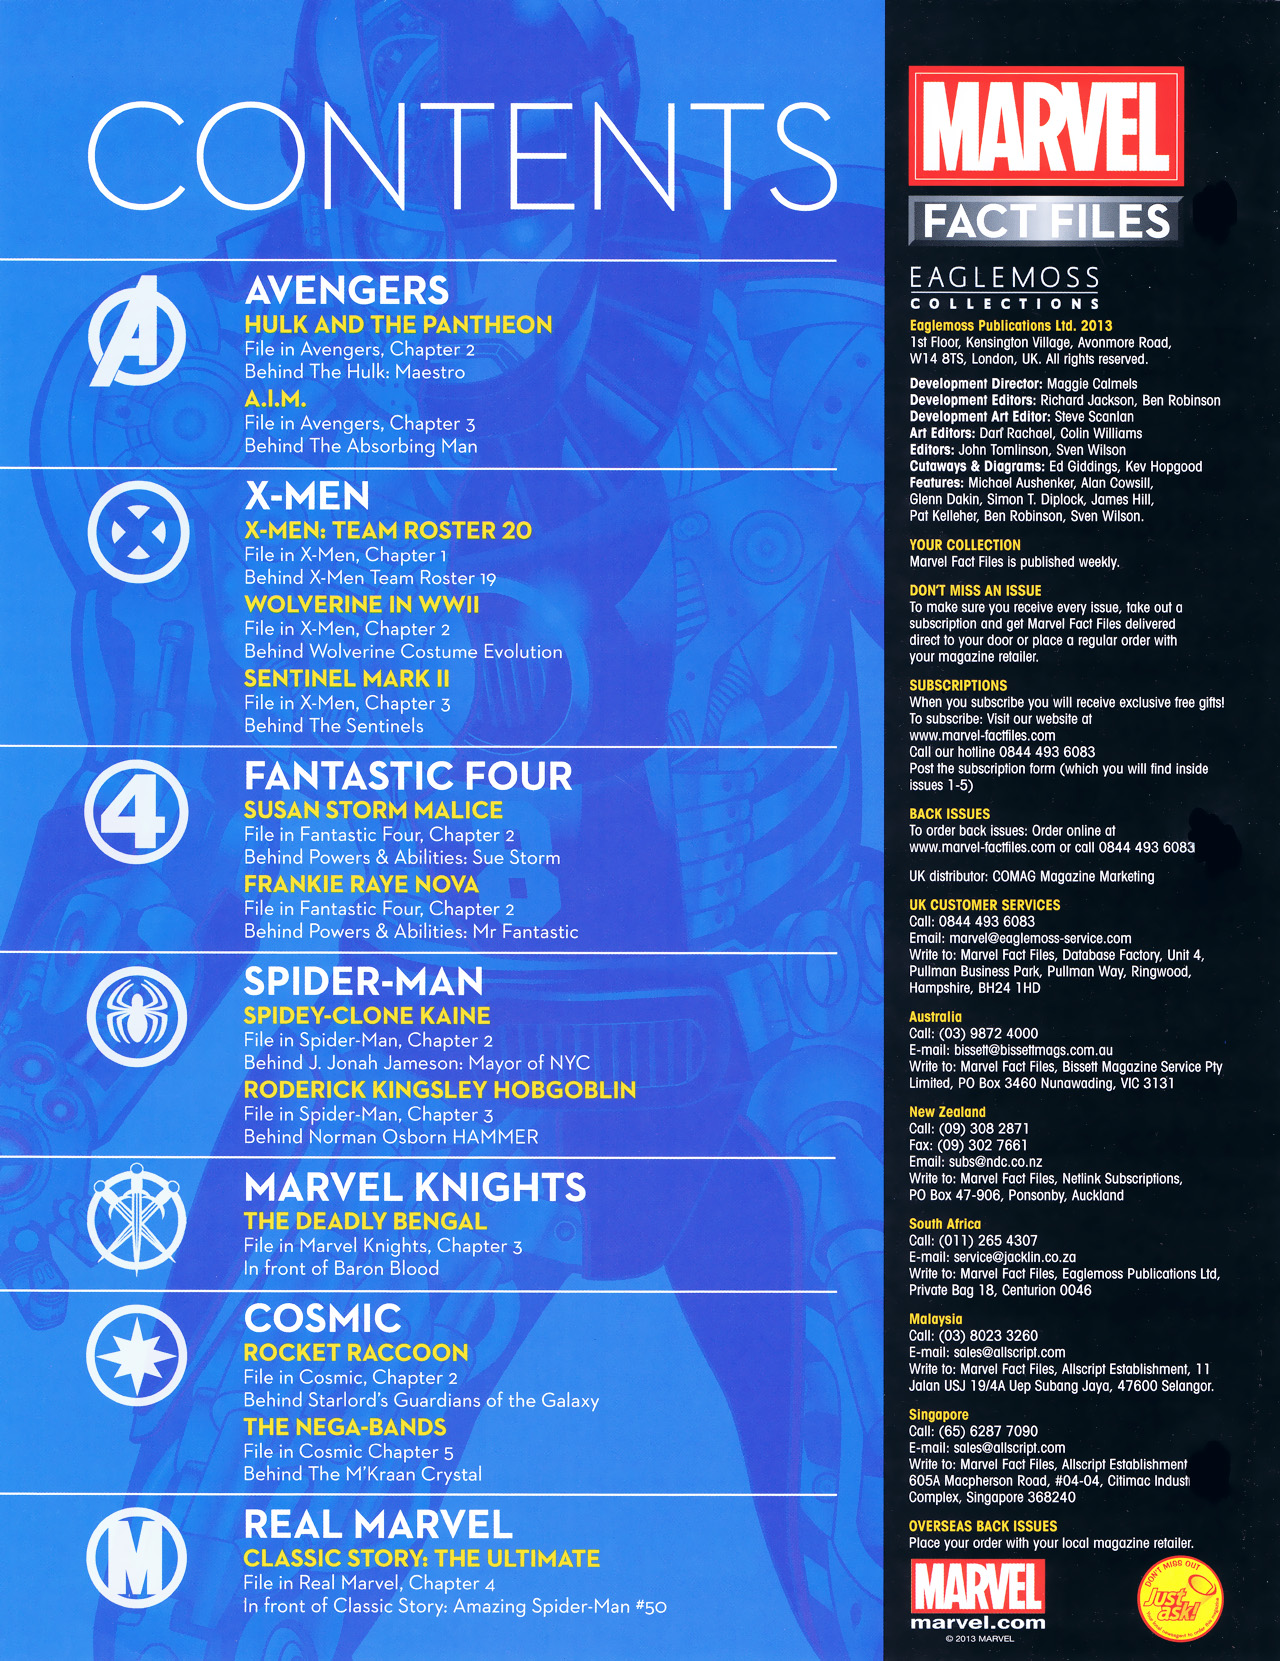 Read online Marvel Fact Files comic -  Issue #20 - 3